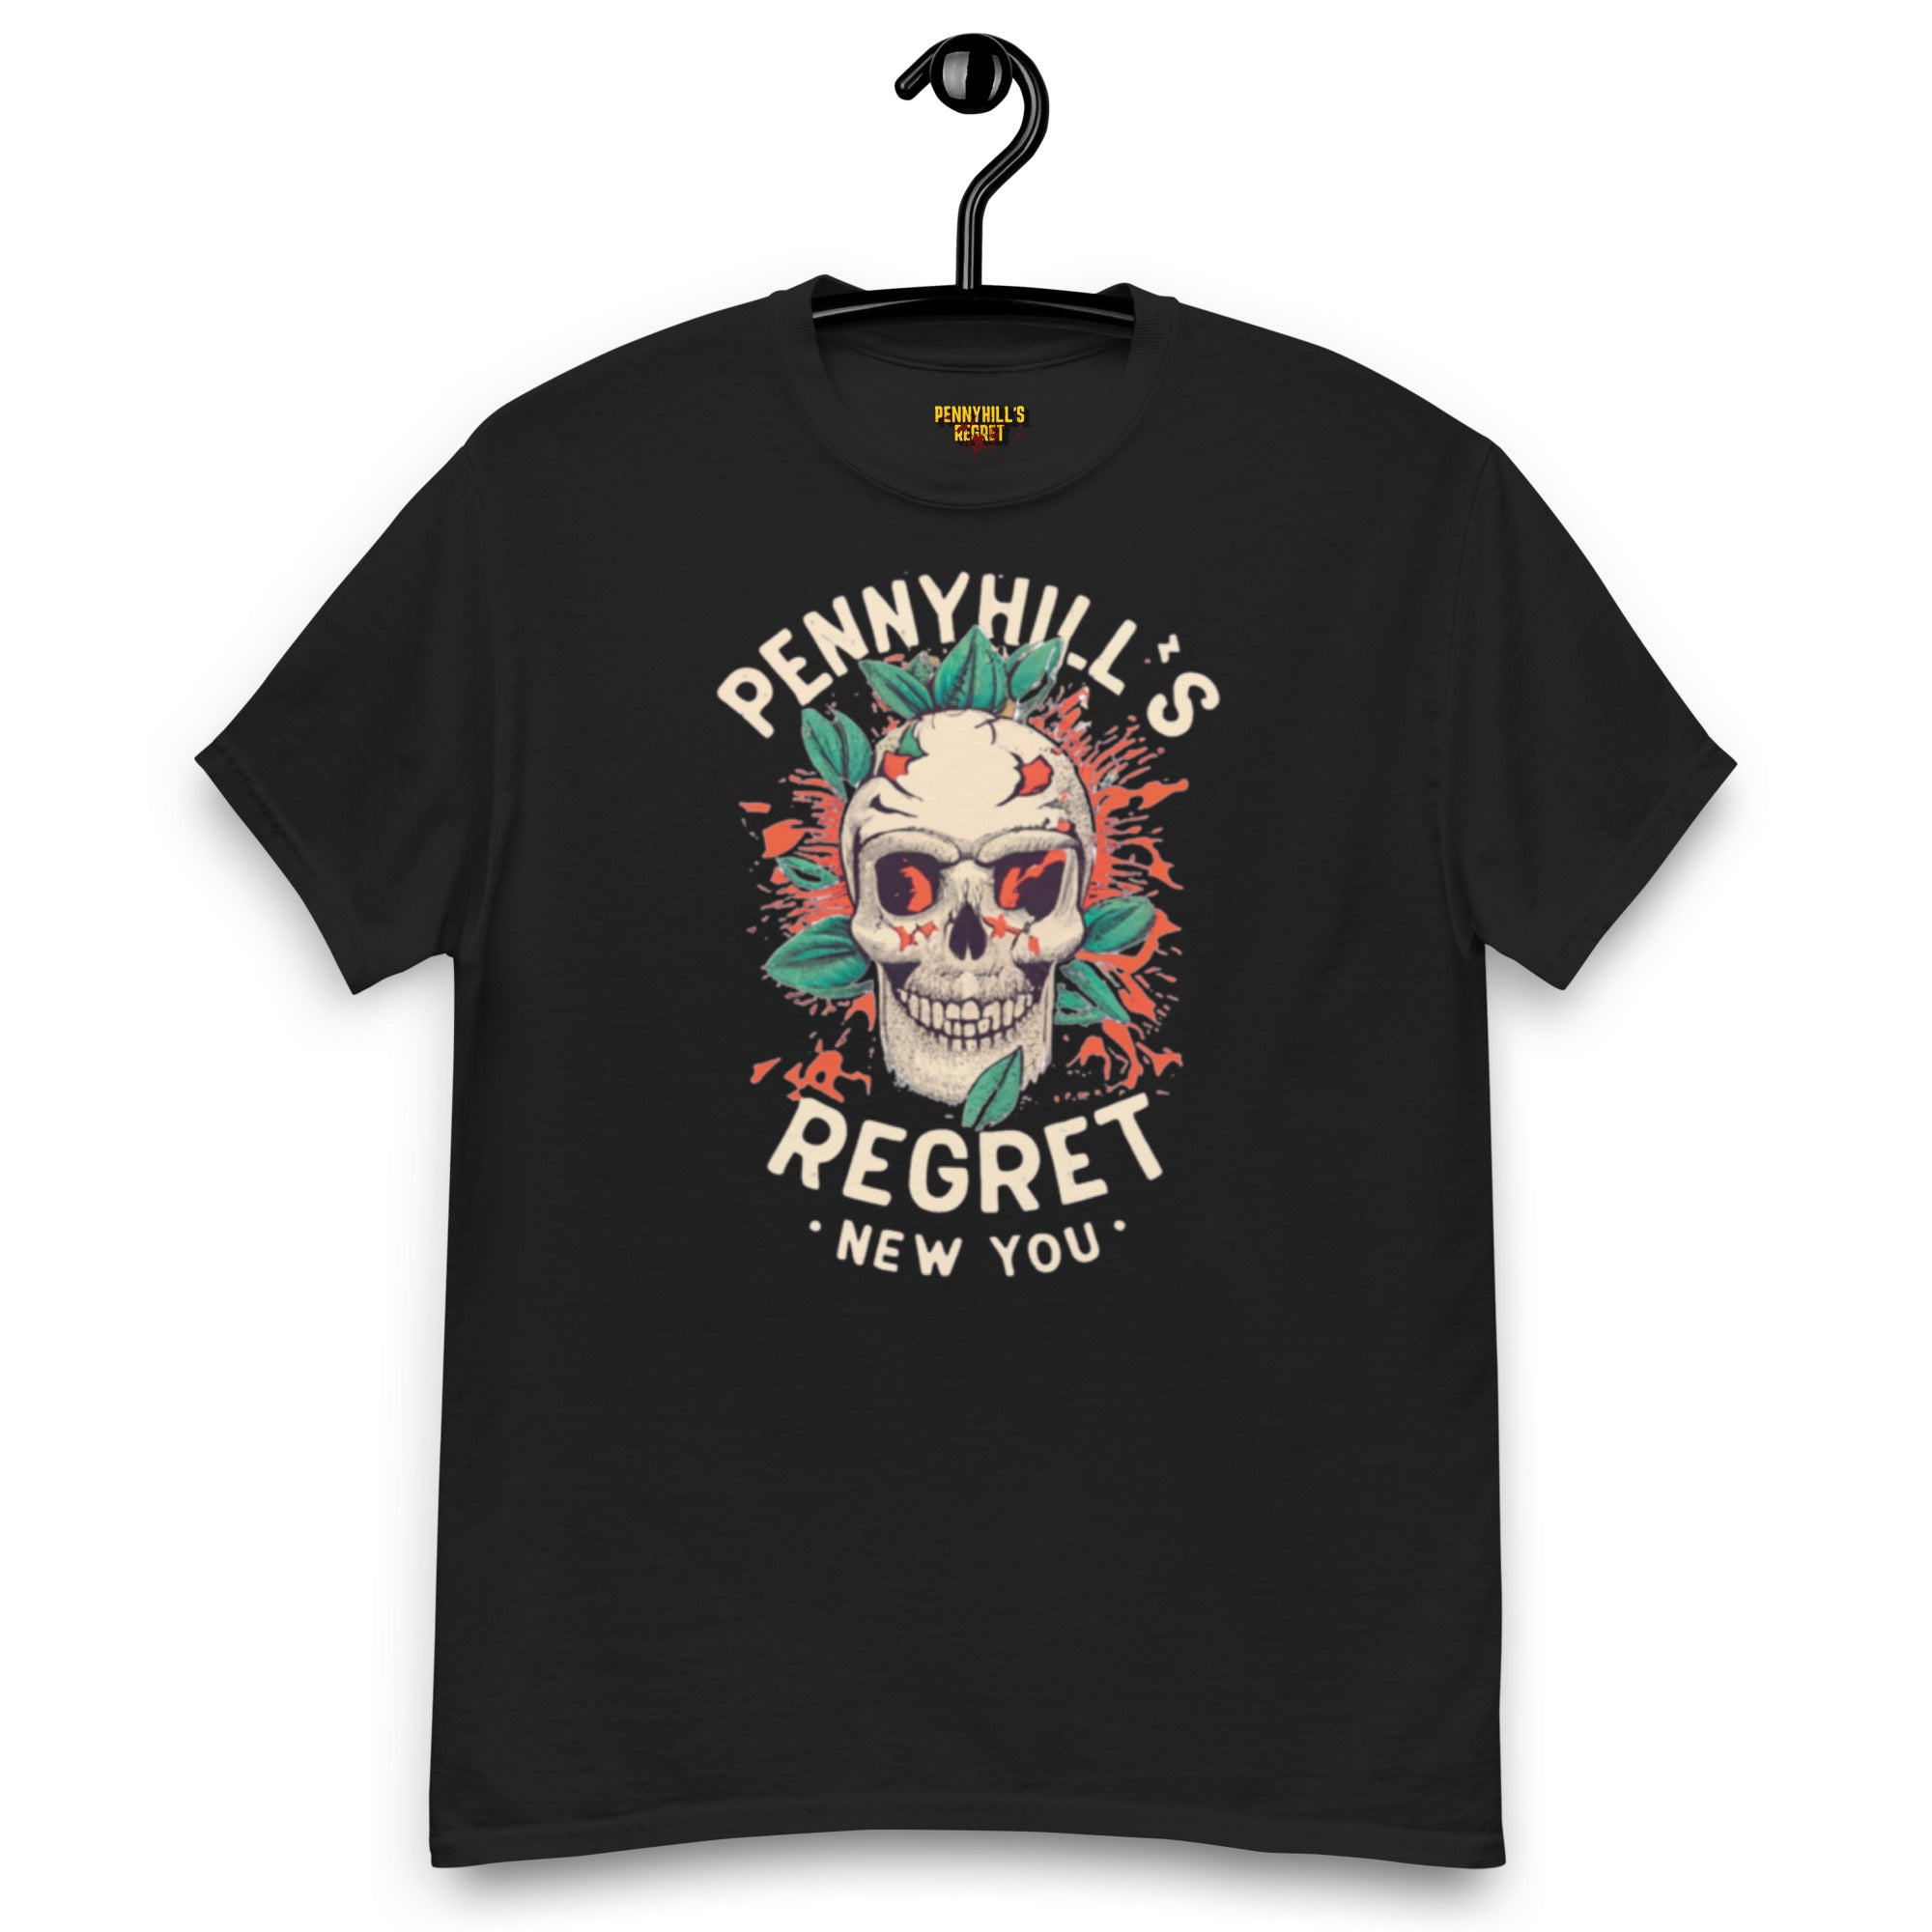 New You Men's classic tee - Pennyhill's Regret